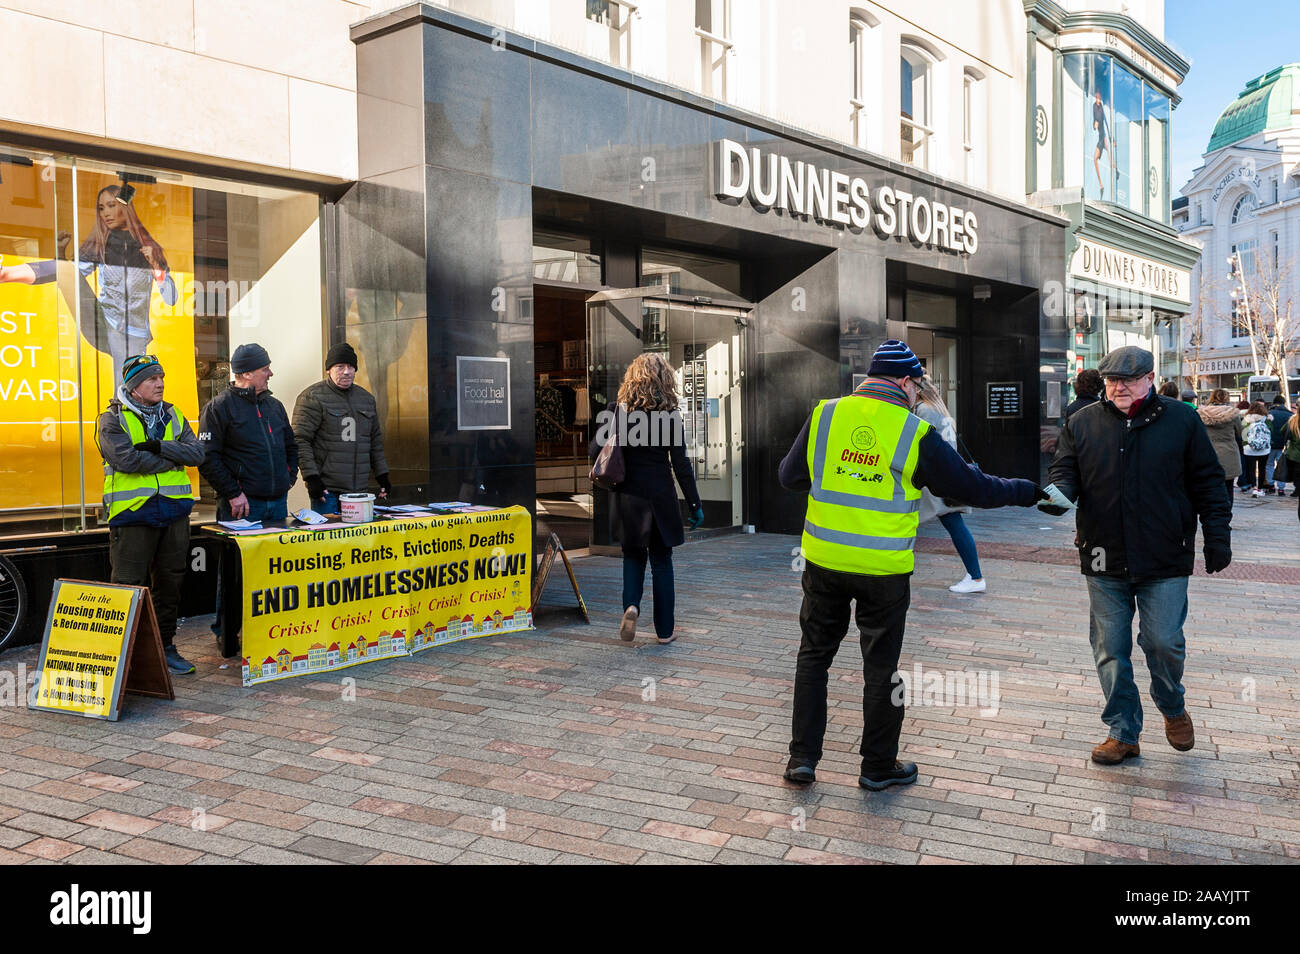 People hand out leaflets about homelessness on Patrick Street, Cork city centre, Ireland. Stock Photo